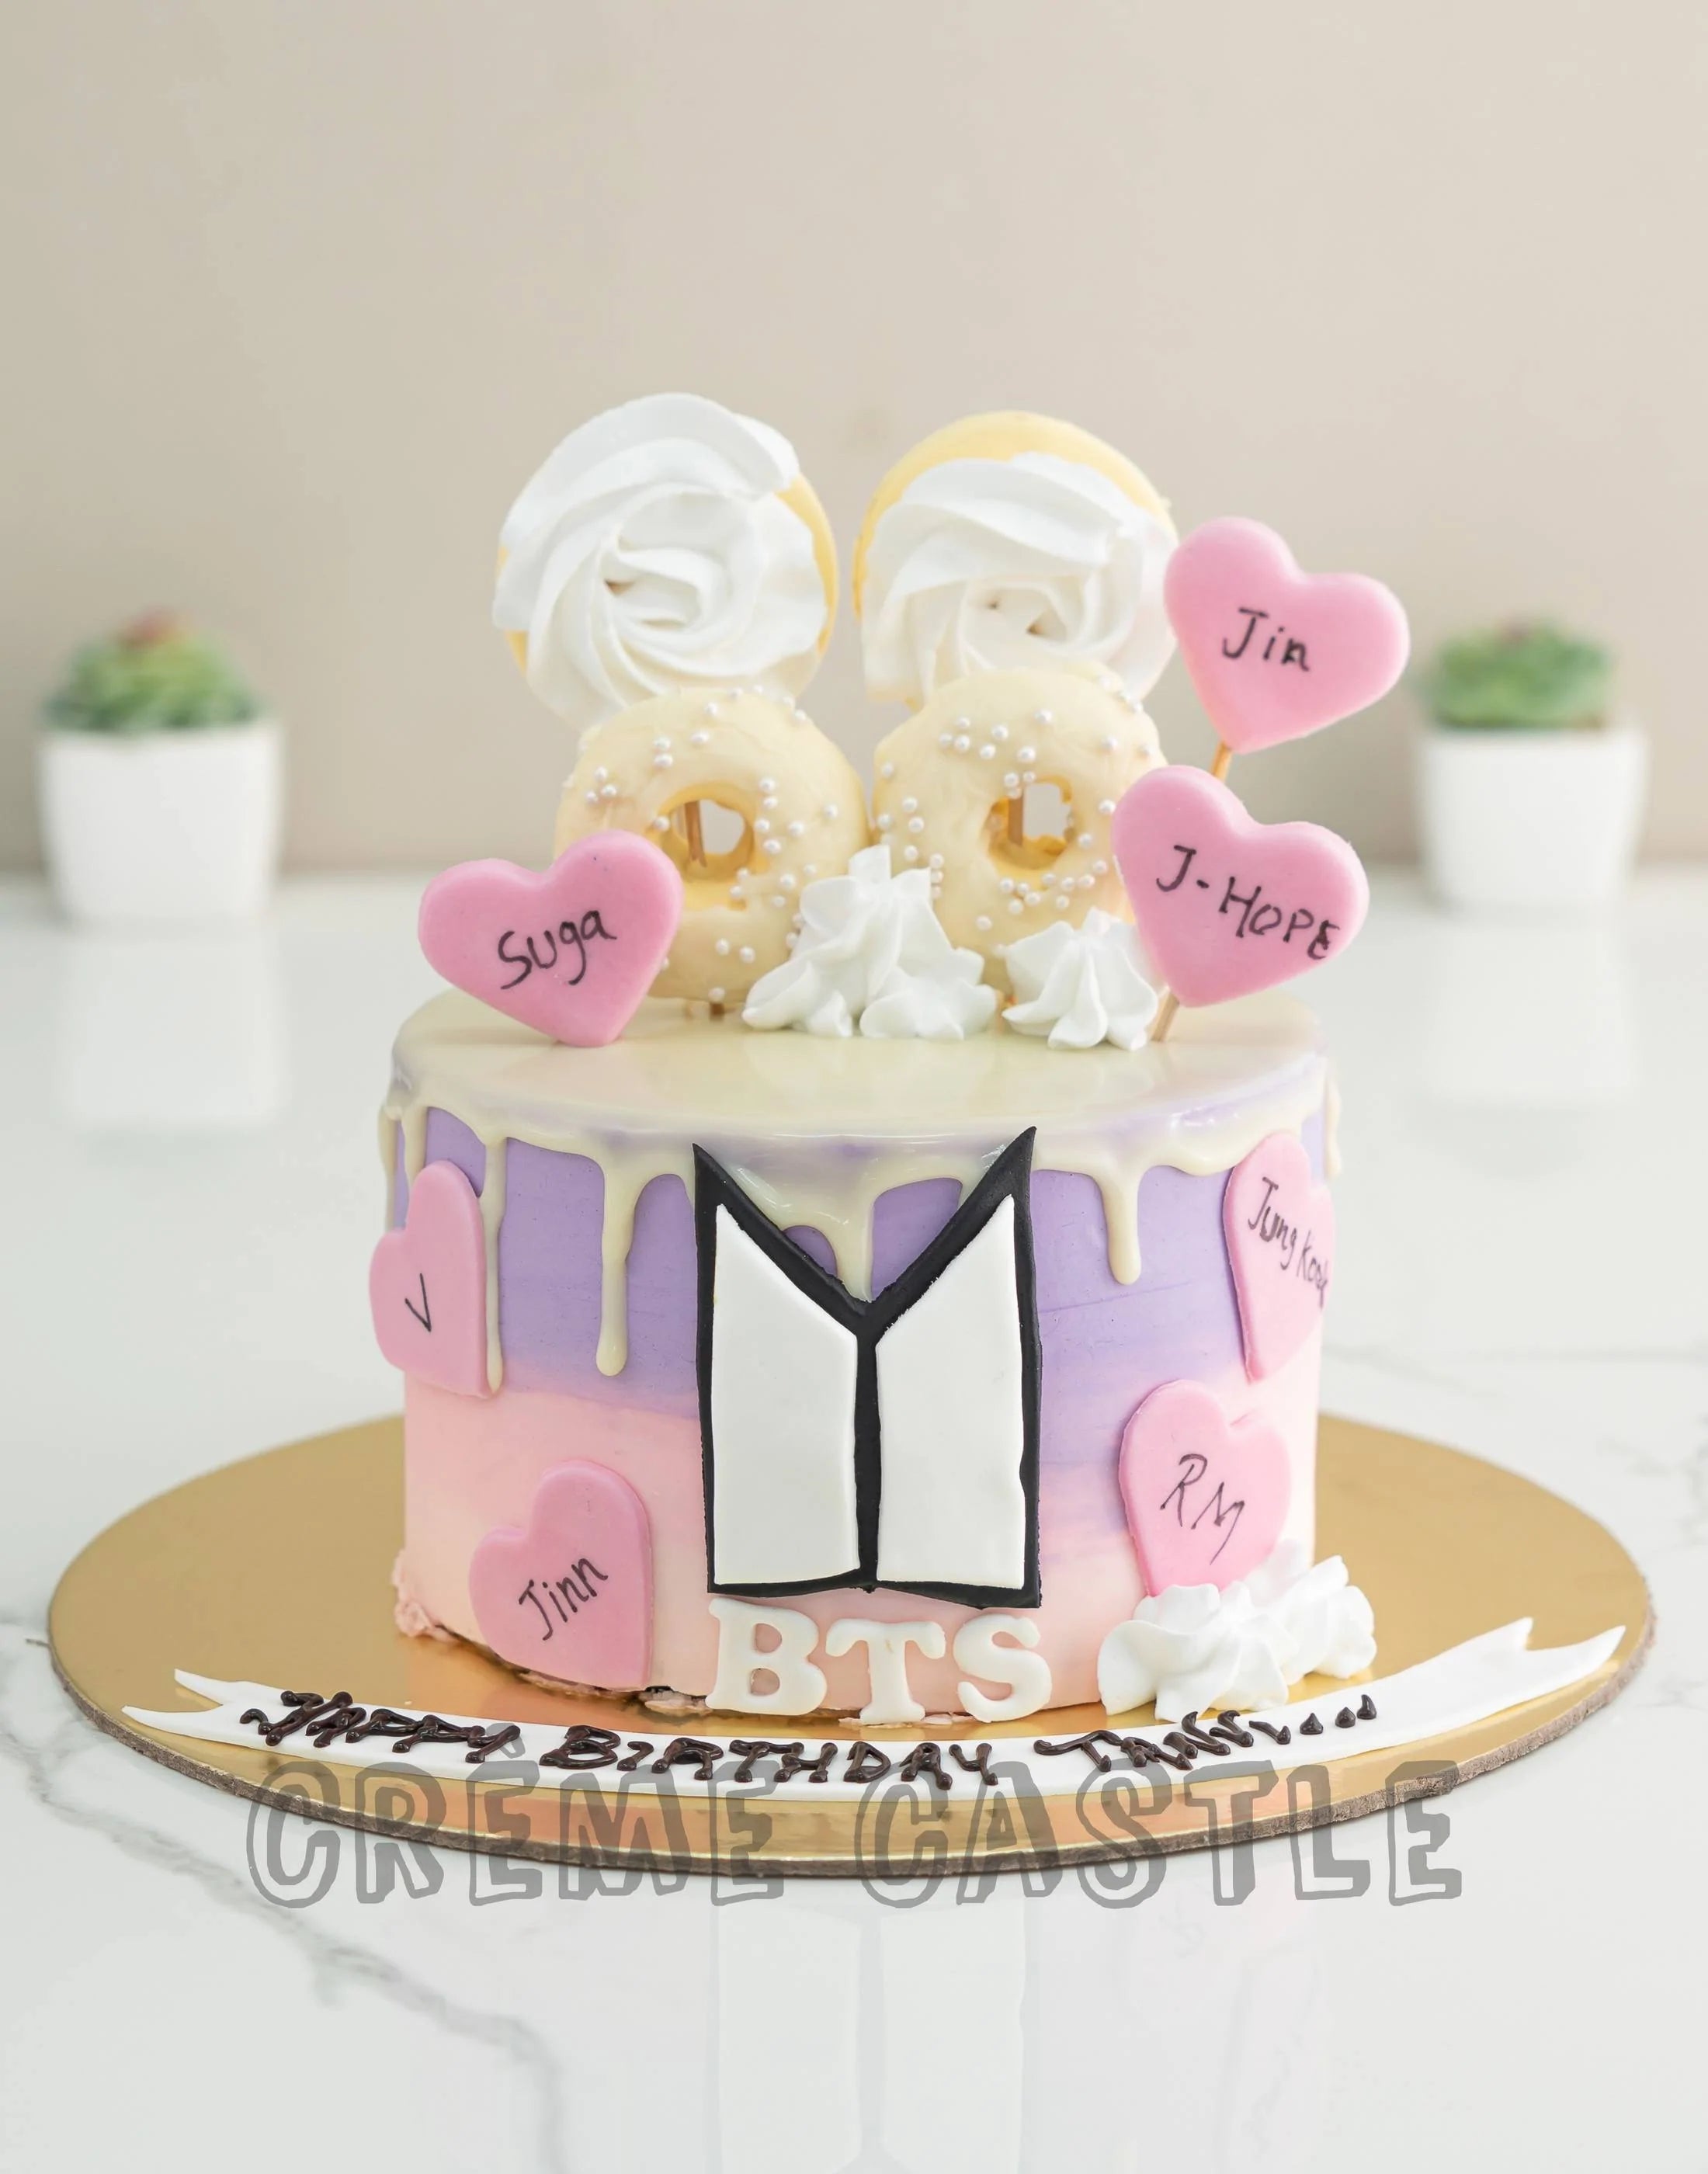 BTS Cake - 1140 – Cakes and Memories Bakeshop